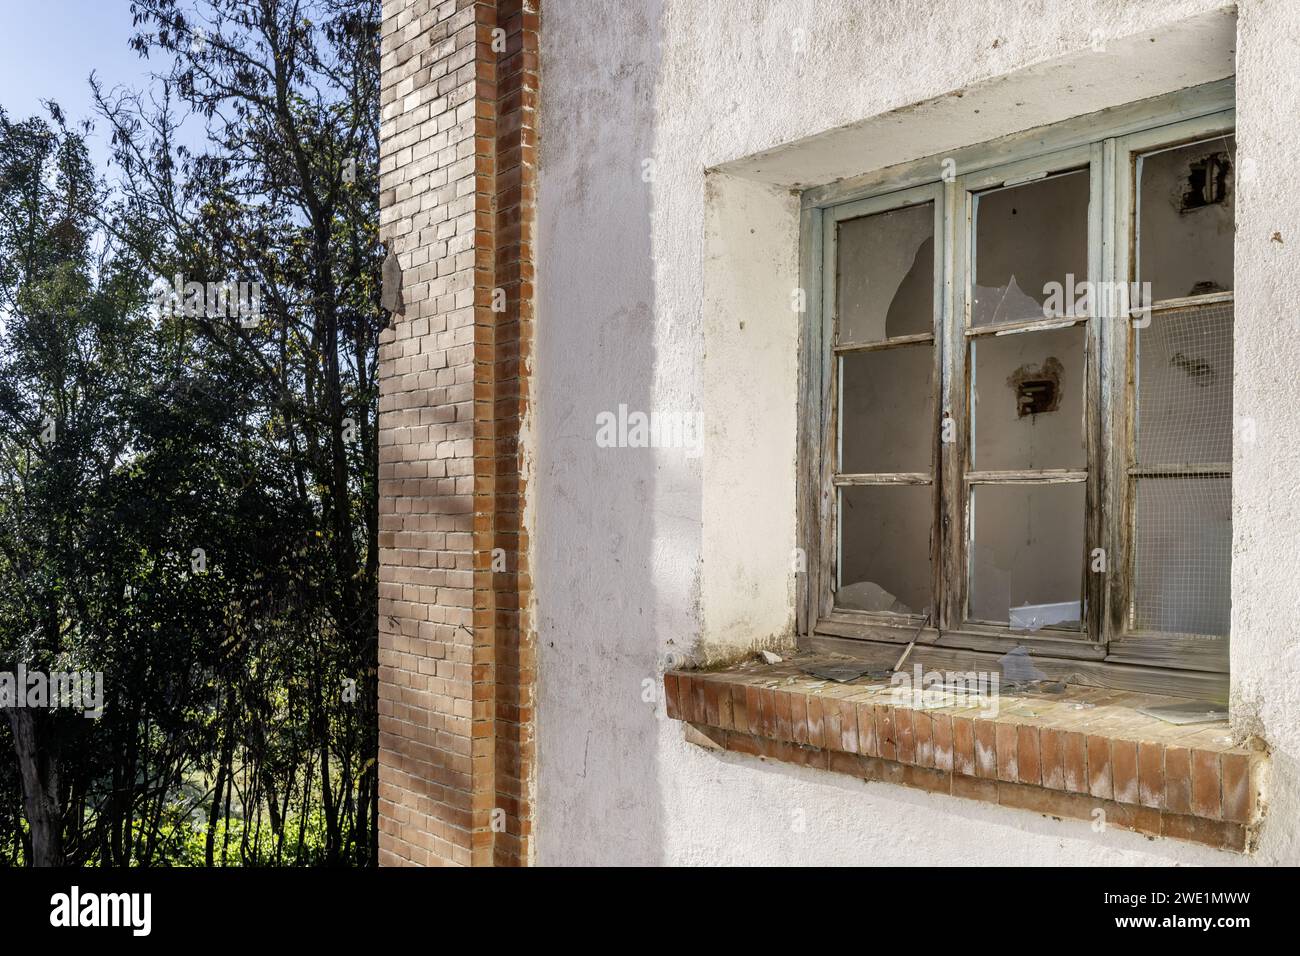 An old, rickety window with broken glass in an old, abandoned building Stock Photo